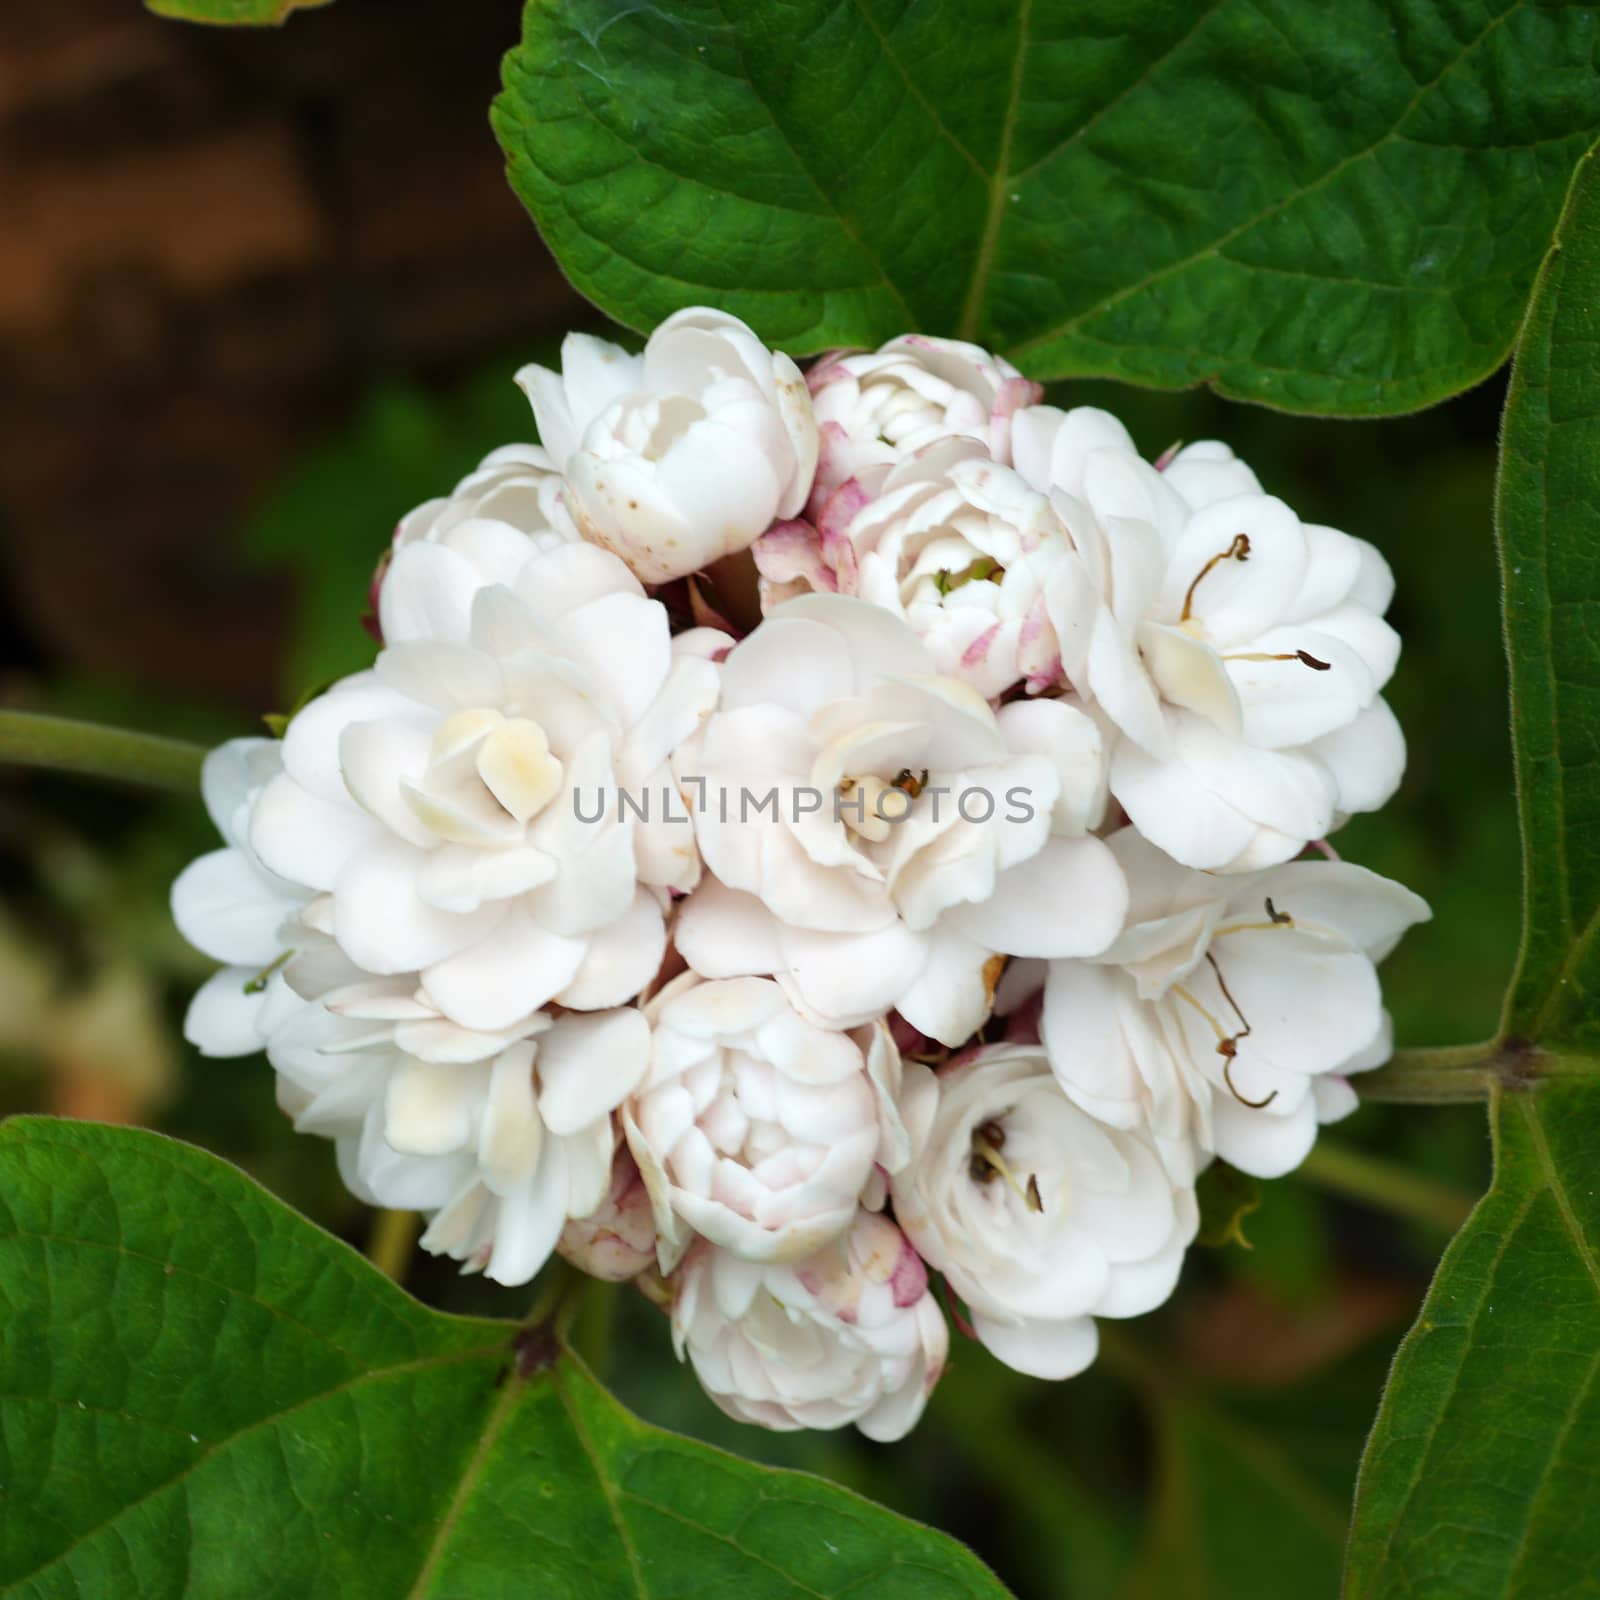 Blooming rose clerodendrum (Clerodendrum fragrans) flower. by Noppharat_th